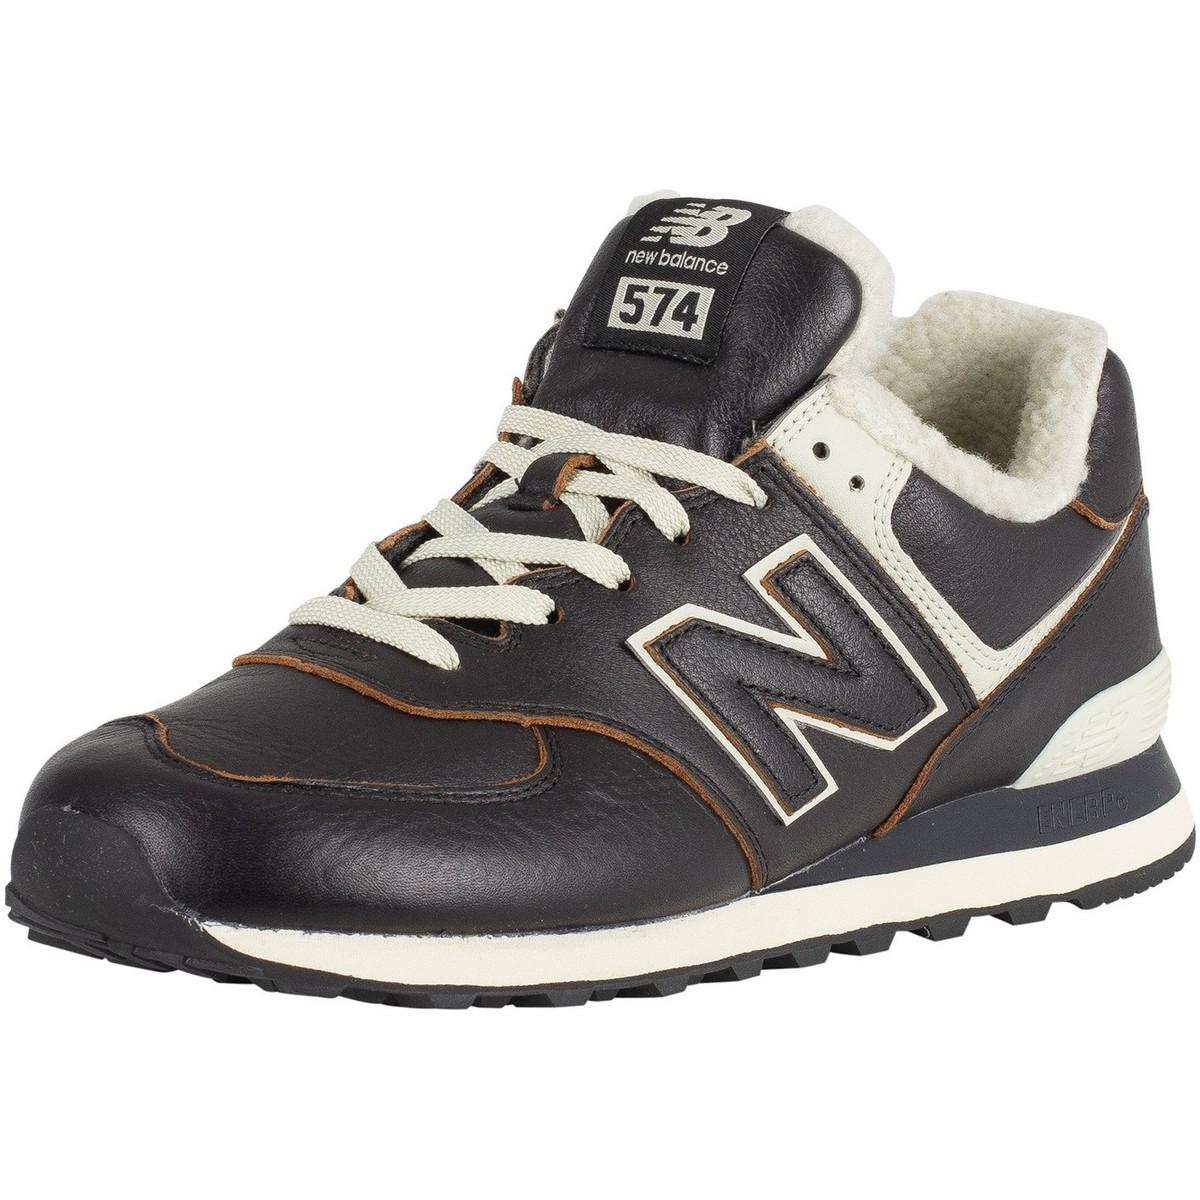 New Balance 574 Leather Sherpa Trainers in Black for Men - Lyst